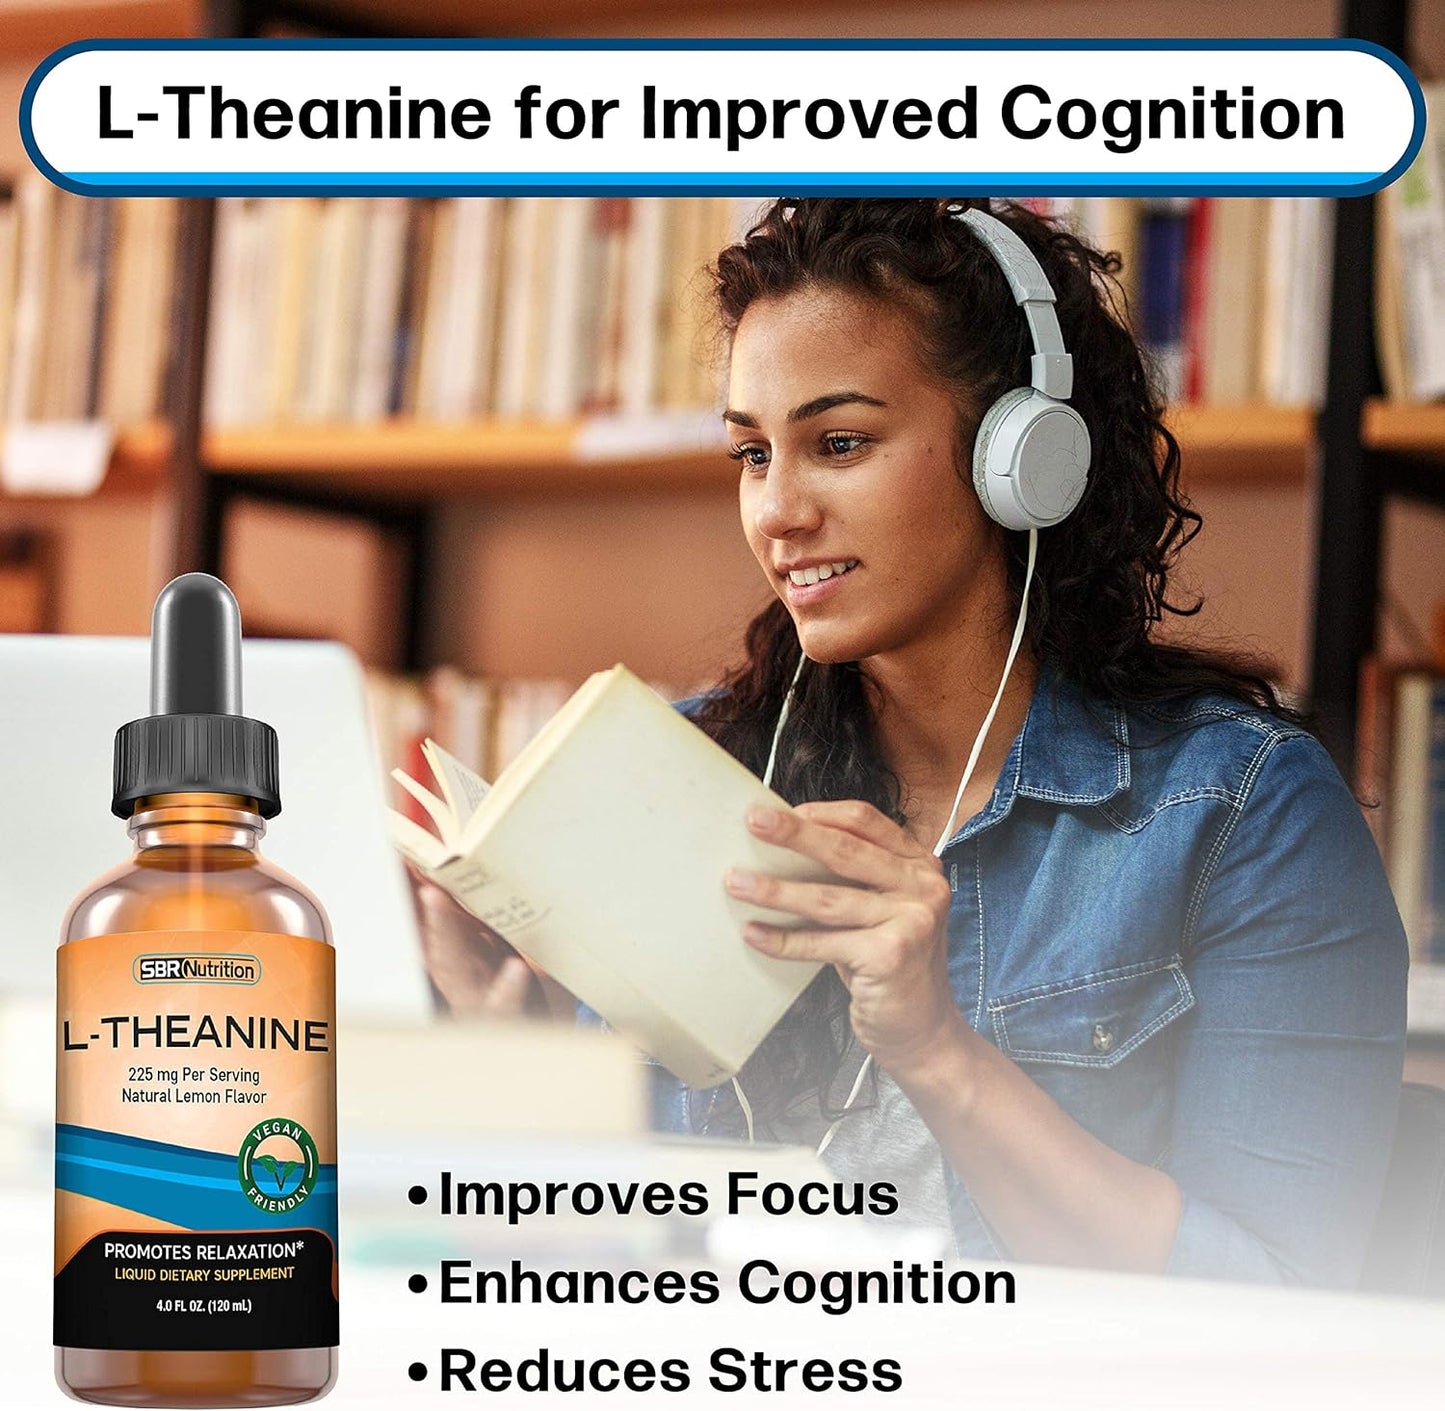 MAX Absorption Liquid L-Theanine Drops | All Natural, Vegan, Alcohol Free, Non-GMO | for Stress Relief, Relaxation, Focus Without Drowsiness | Synergistic with Coffee or Caffeine